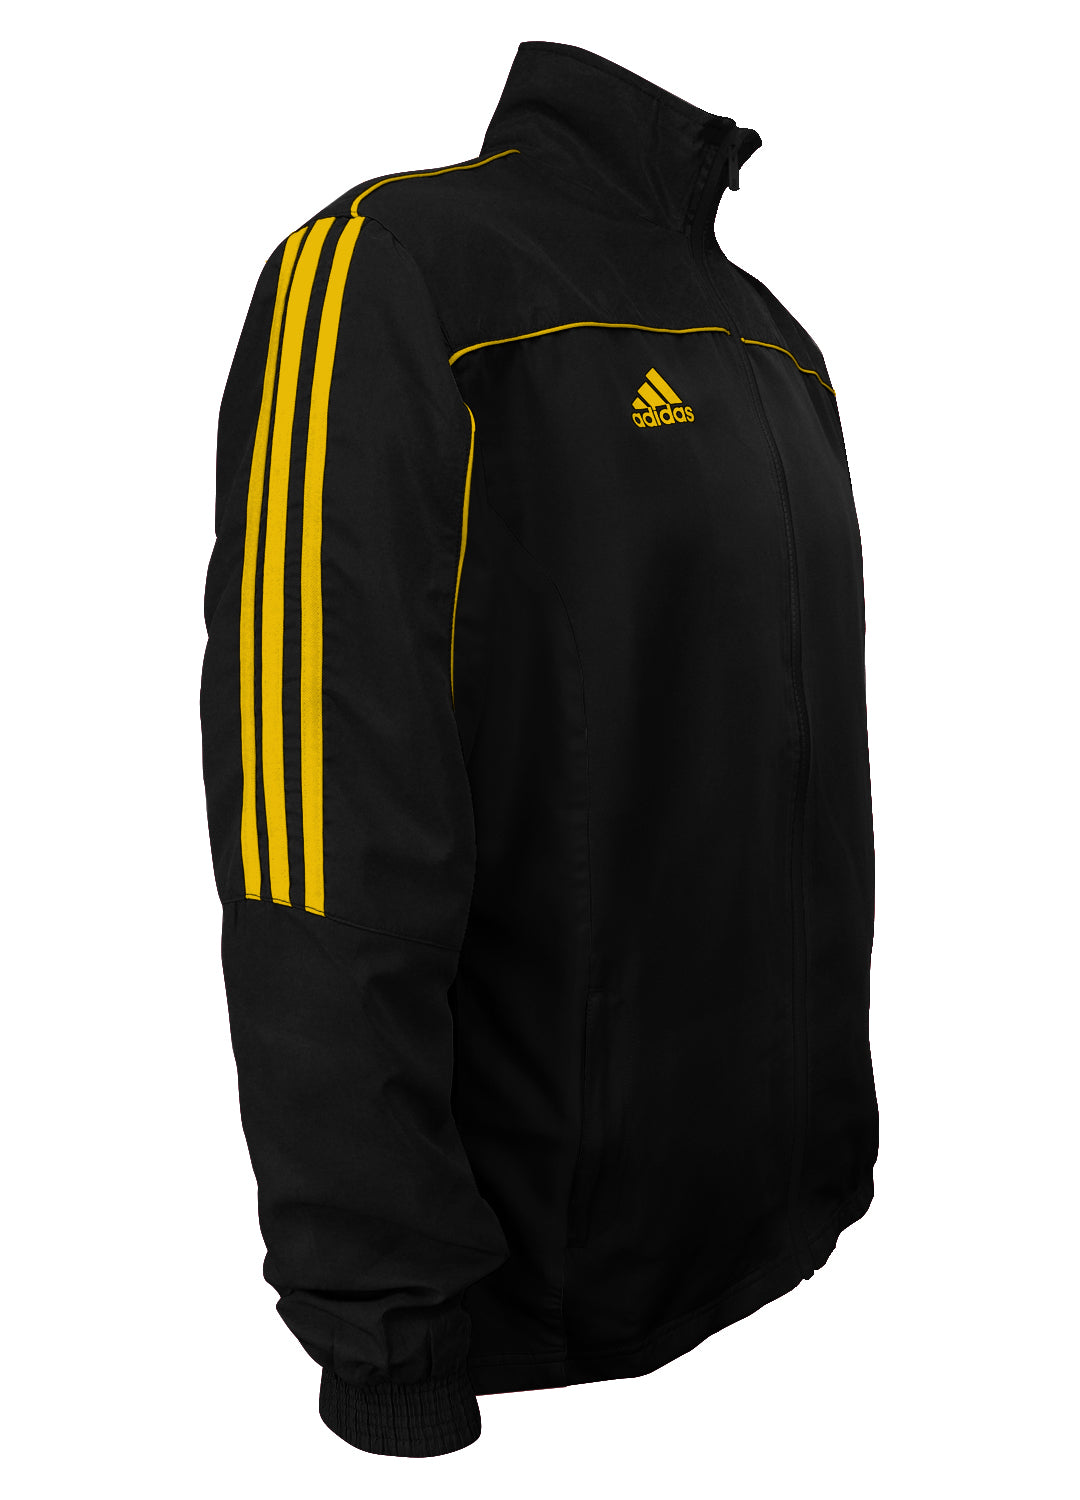 adidas Black with Gold Stripes Windbreaker Style Team Jacket Side View